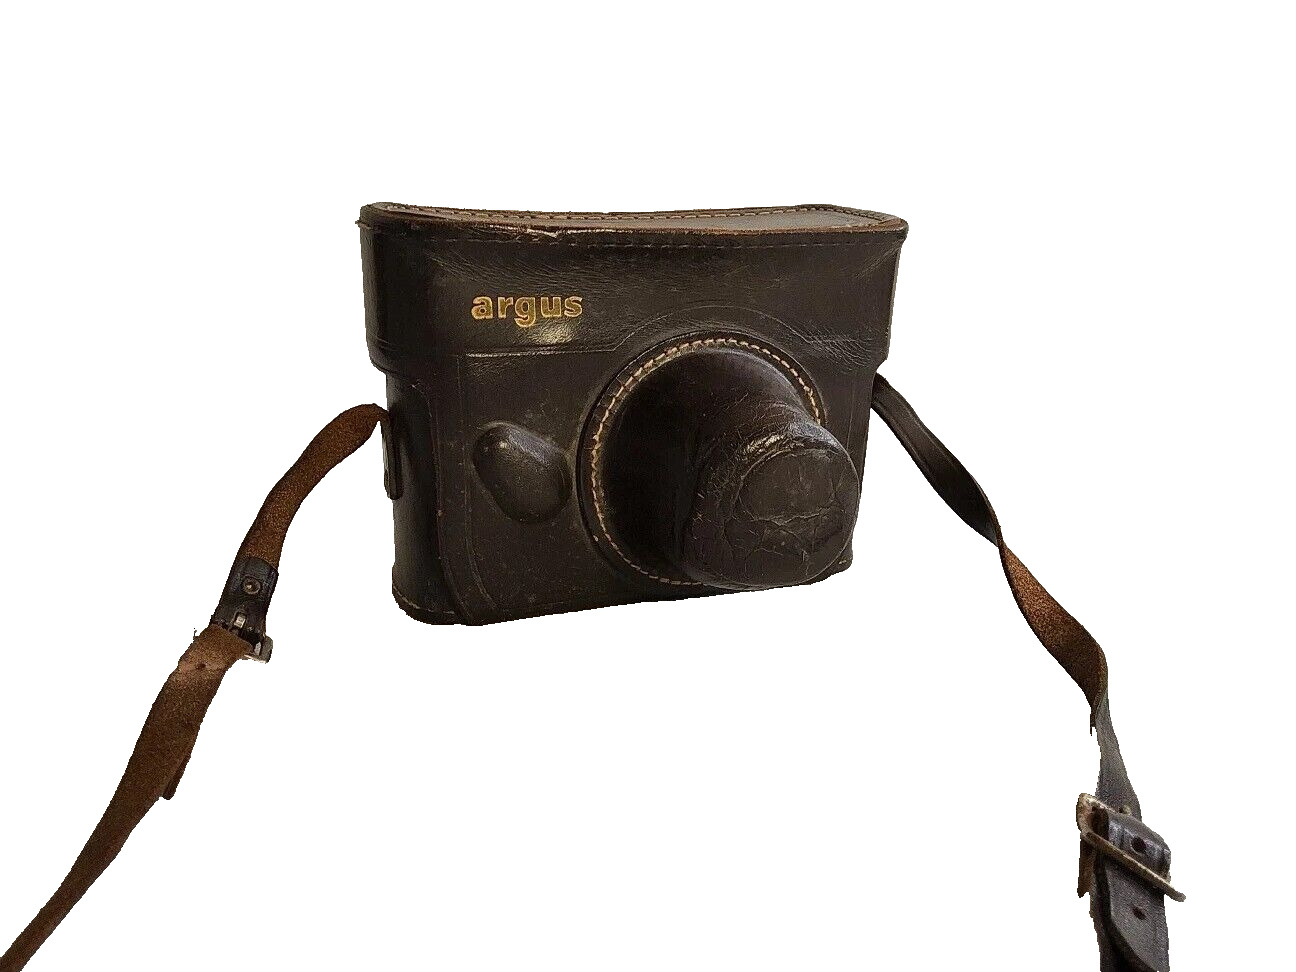 Vintage Argus camera with leather case and lense Fly Fishing Outdoor Hiking